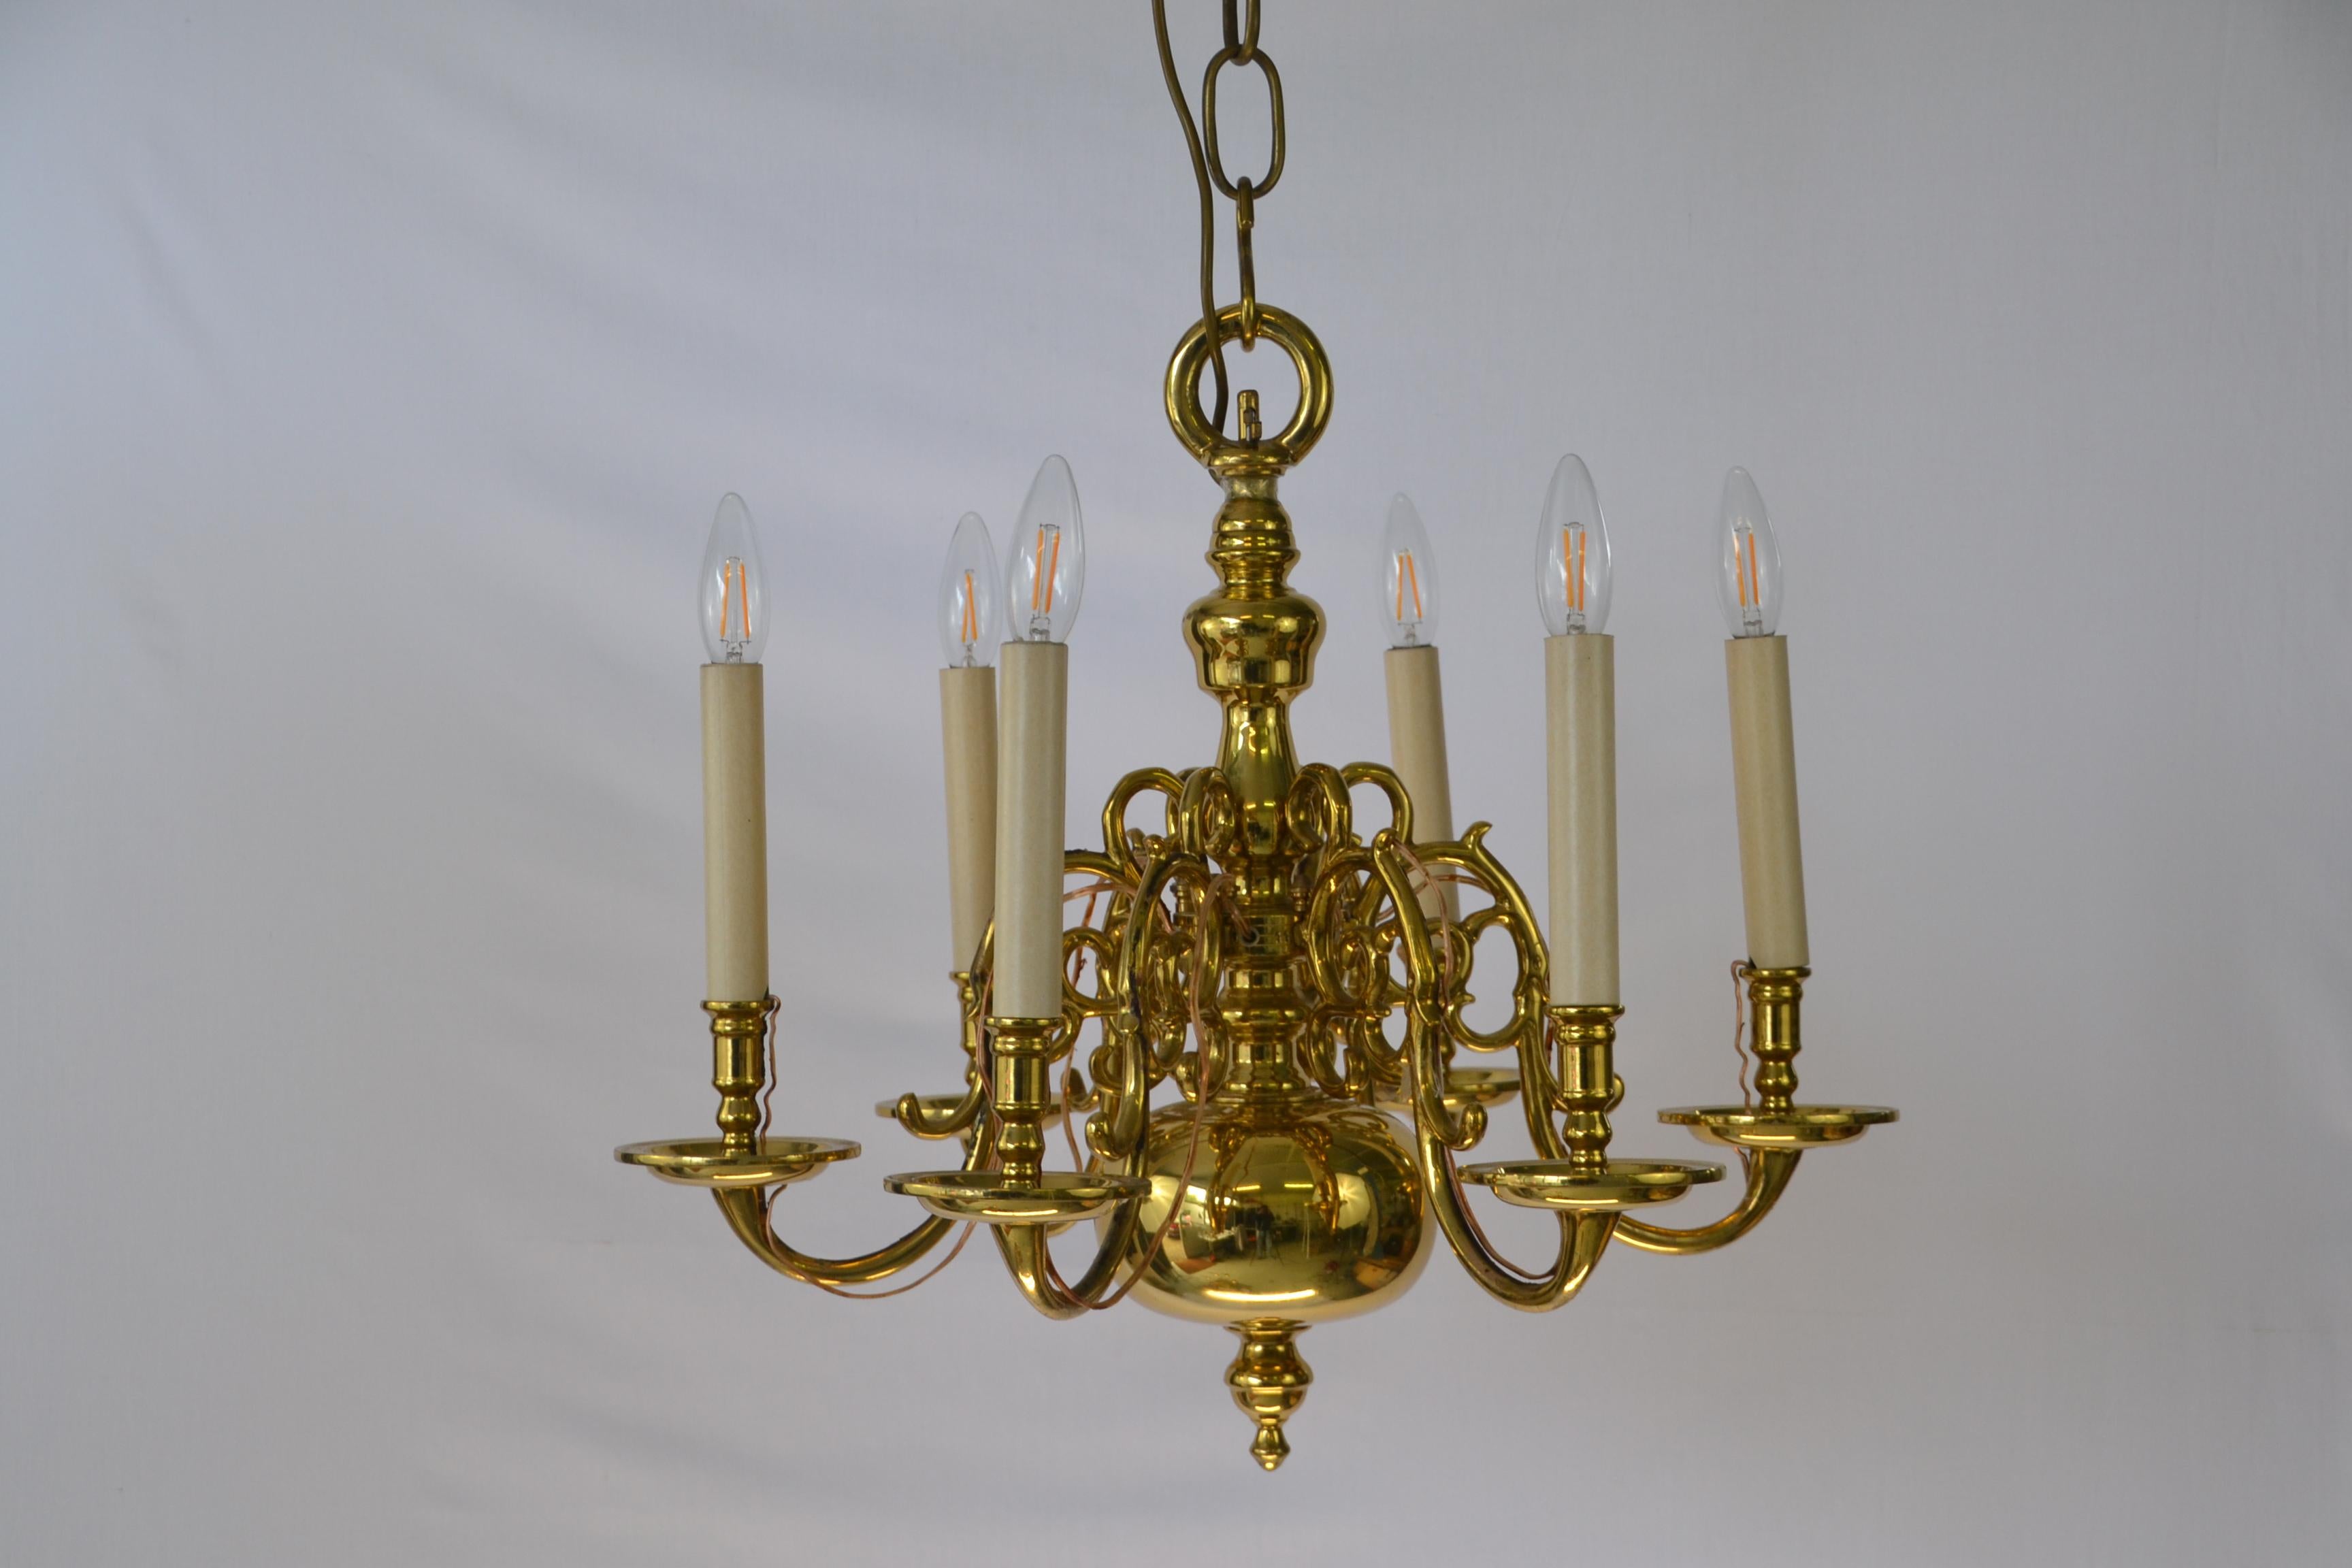 1 Tier 17th Century Electric Model Dutch Brass Chandelier with 6 Lights H54xW57 For Sale 4